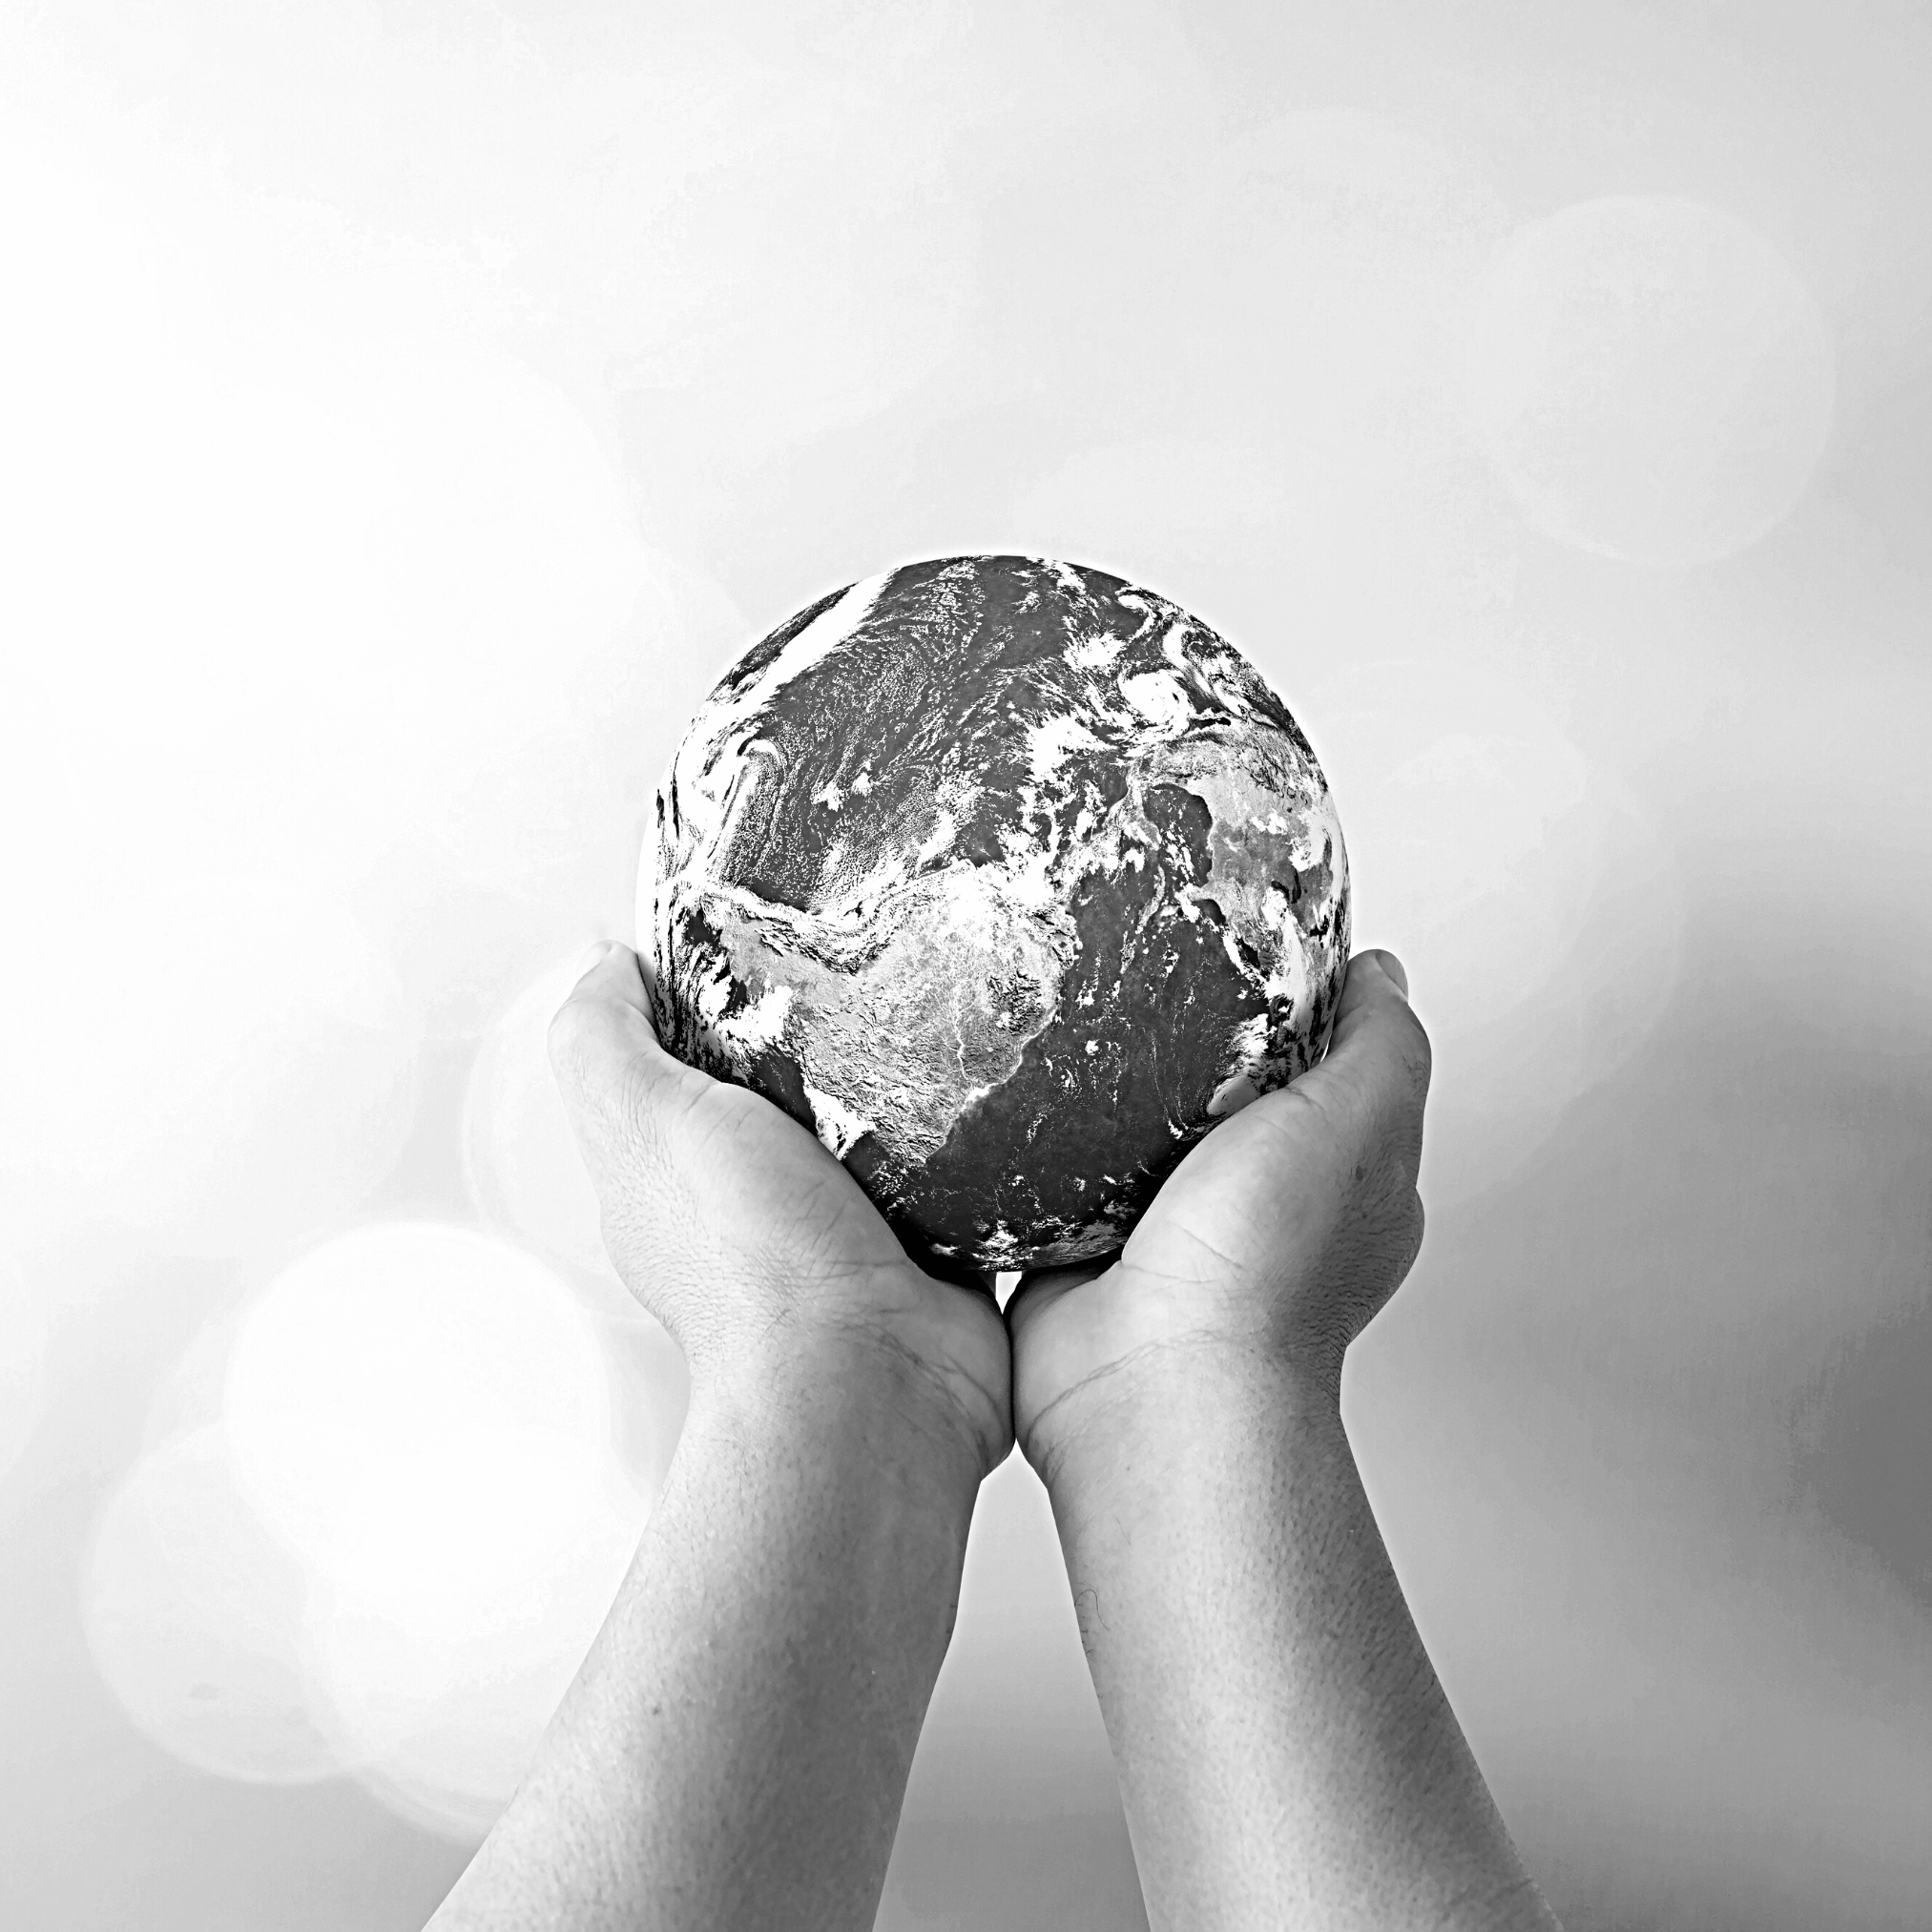 picture of a globe held in two hands